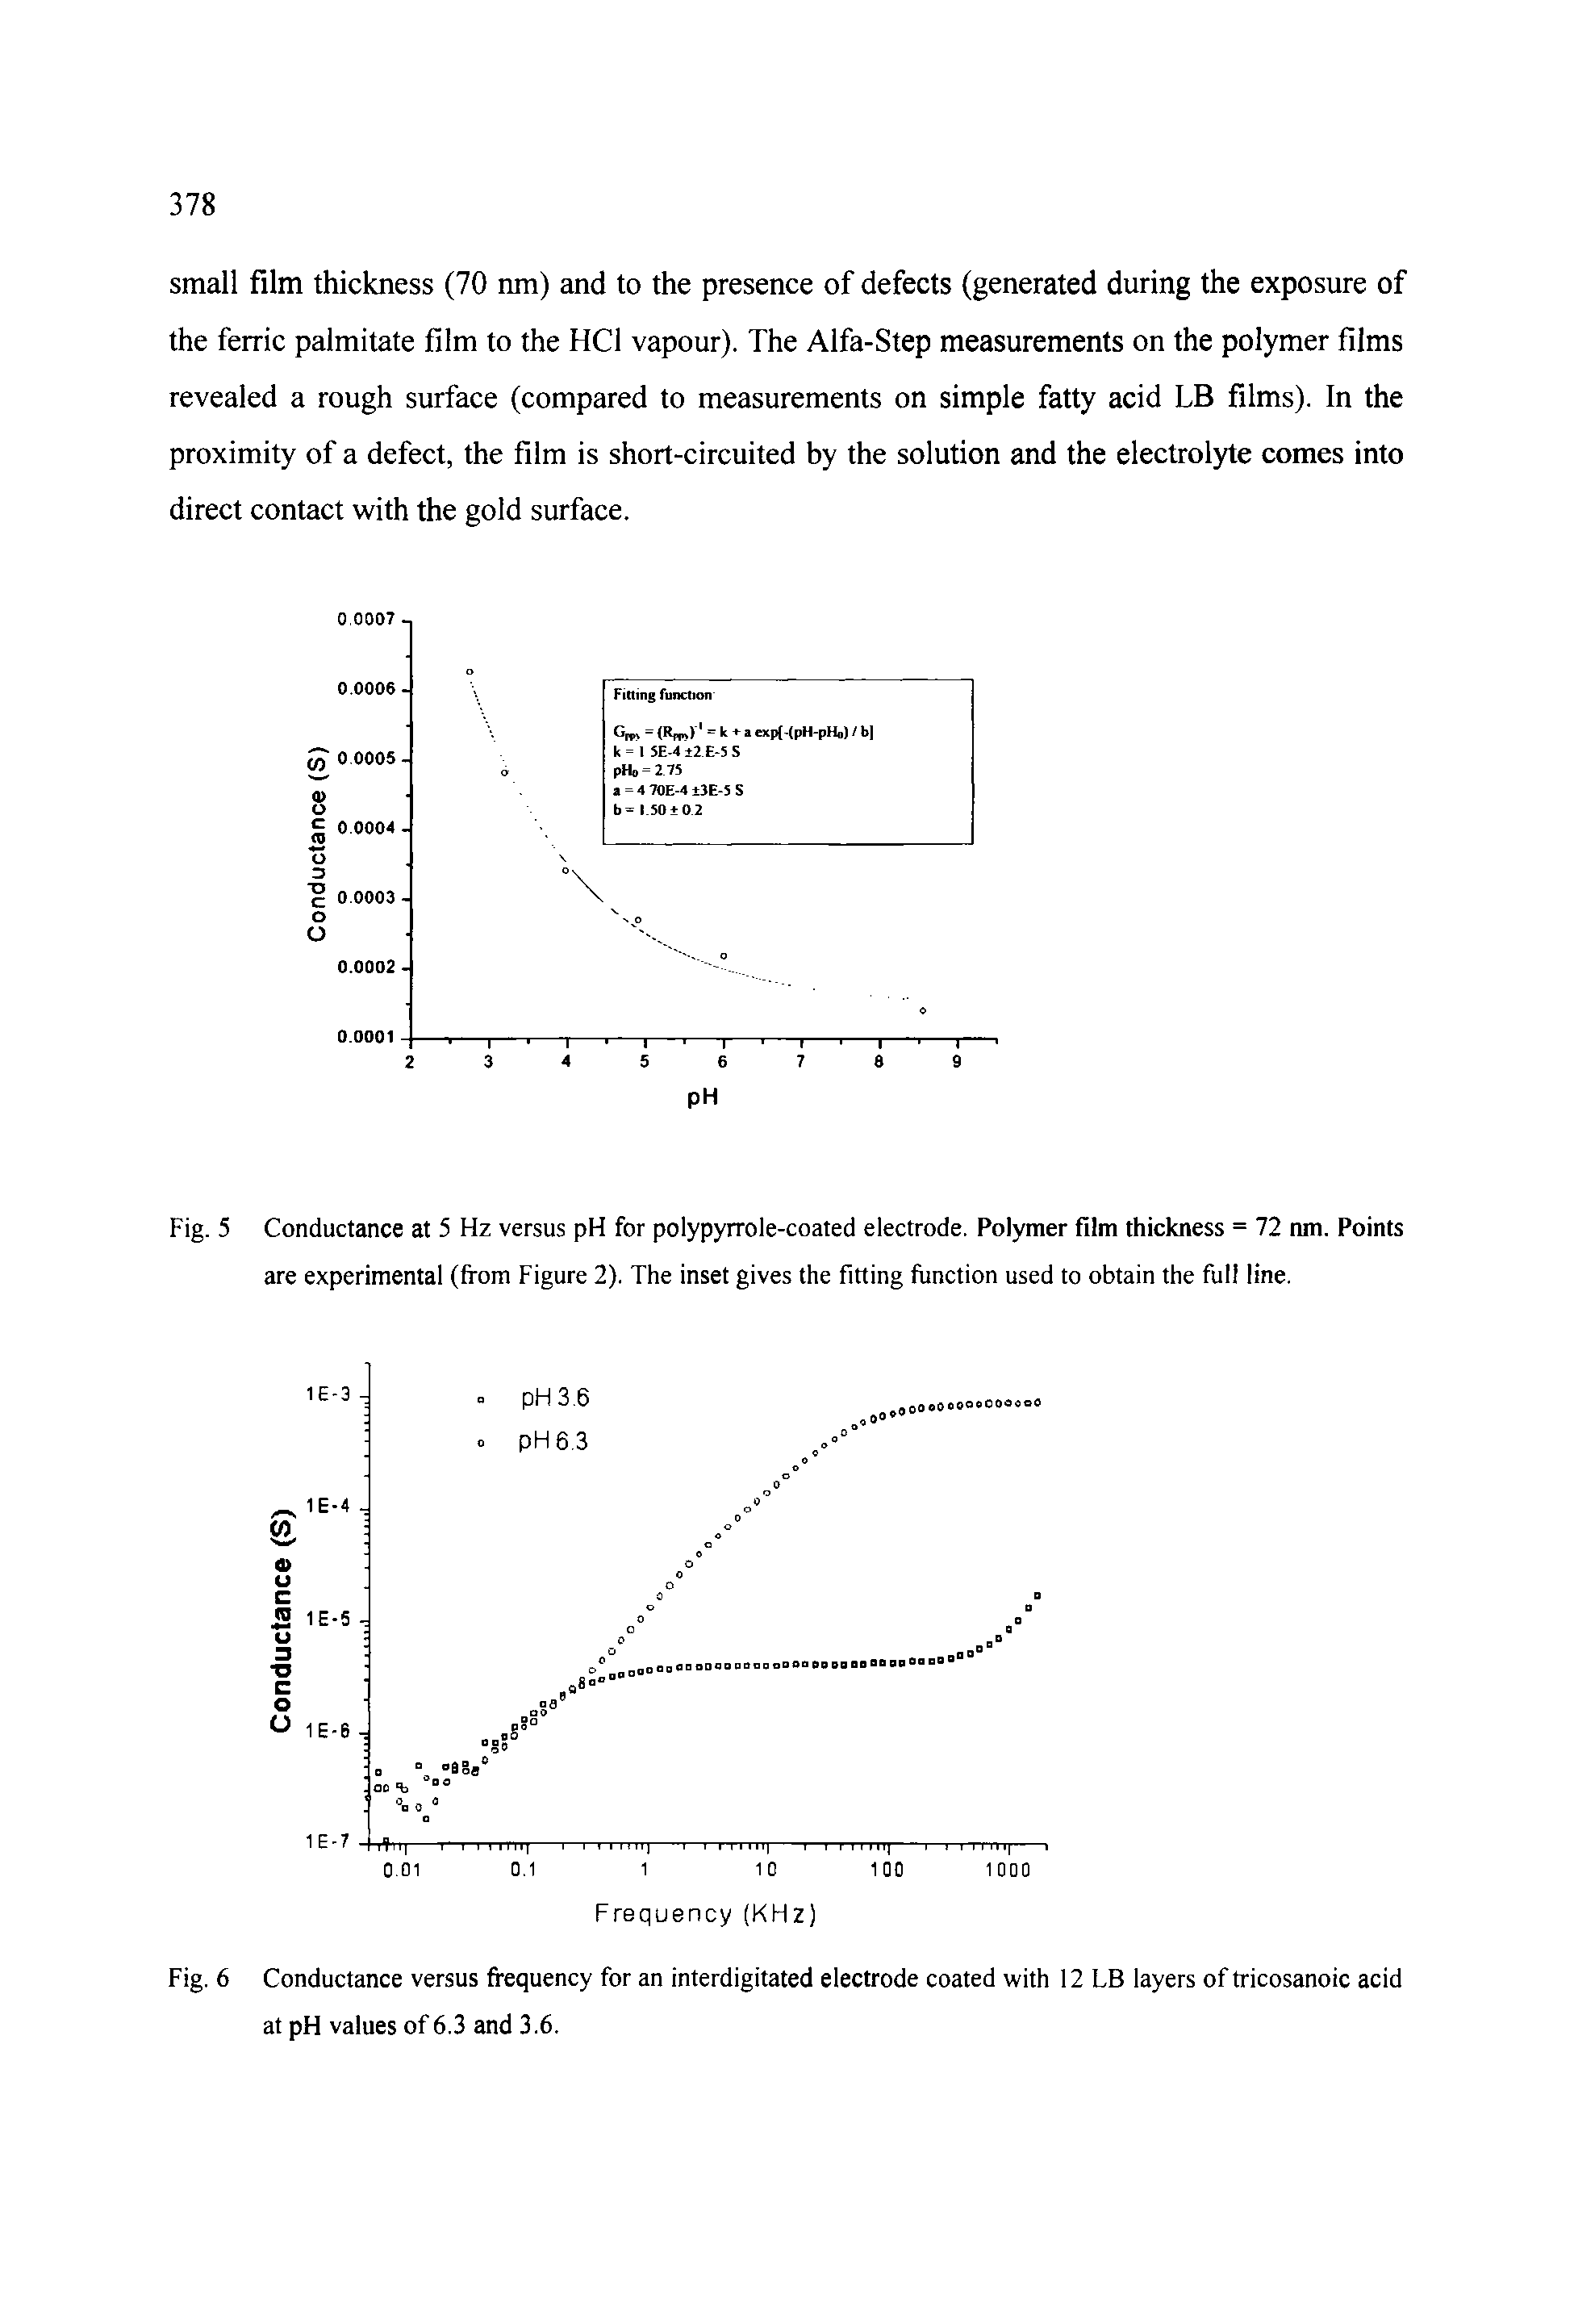 Fig. 5 Conductance at 5 Hz versus pH for polypyrrole-coated electrode. Polymer film thickness = 72 nm. Points are experimental (from Figure 2). The inset gives the fitting function used to obtain the full line.